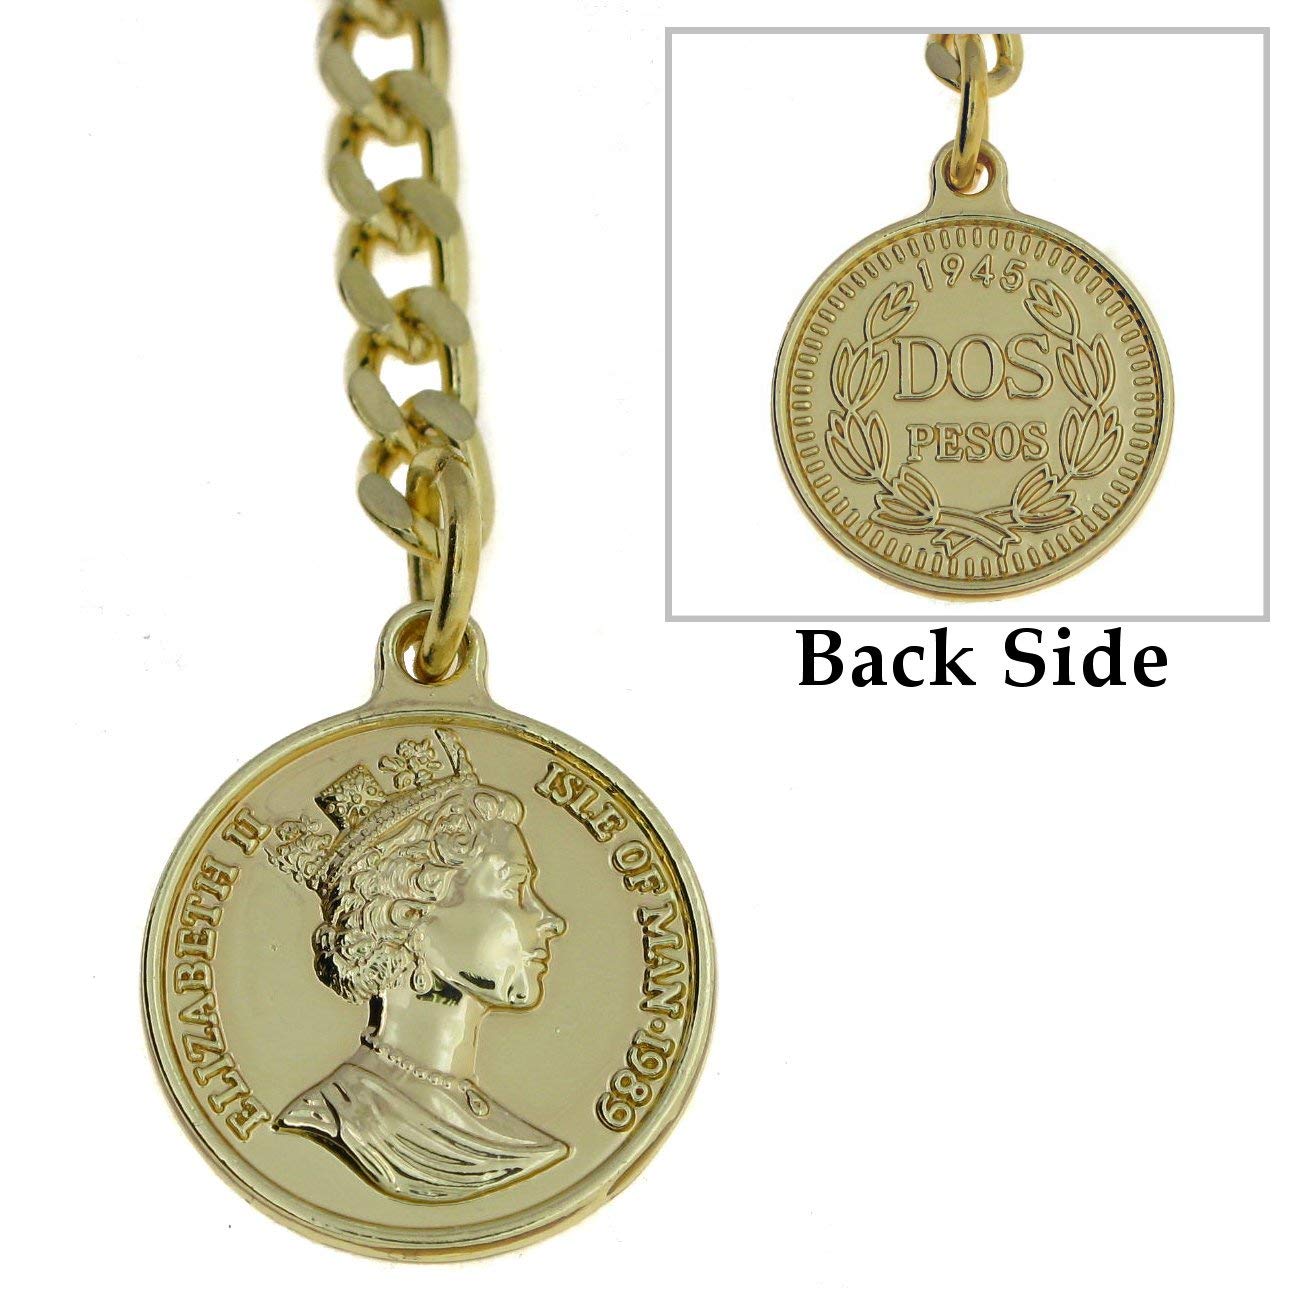 Albert Chain Gold Color Pocket Watch Chains for Men with T Bar Swivel Clasp and Queen Elizabeth II Coin Design Fob AC100